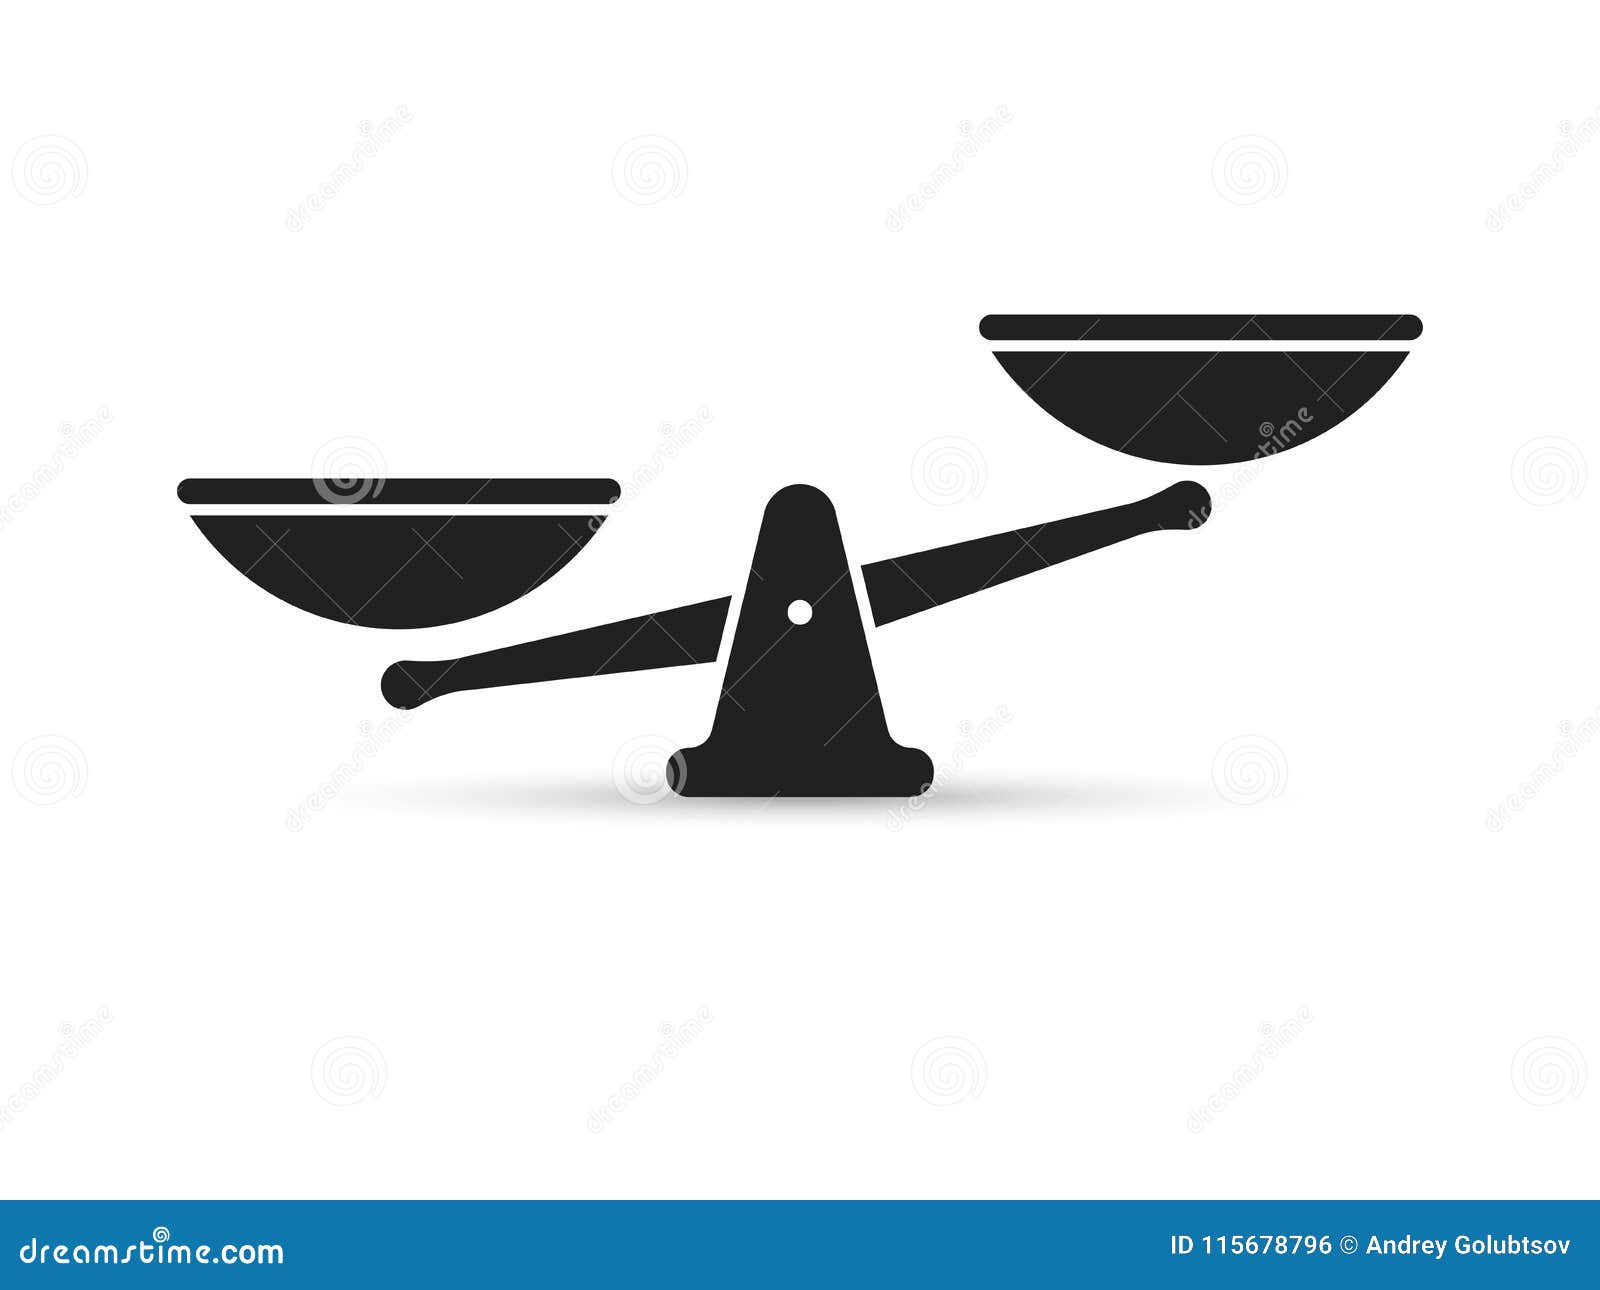 Scales Stock Illustrations – 156,236 Scales Stock Illustrations, Vectors &  Clipart - Dreamstime